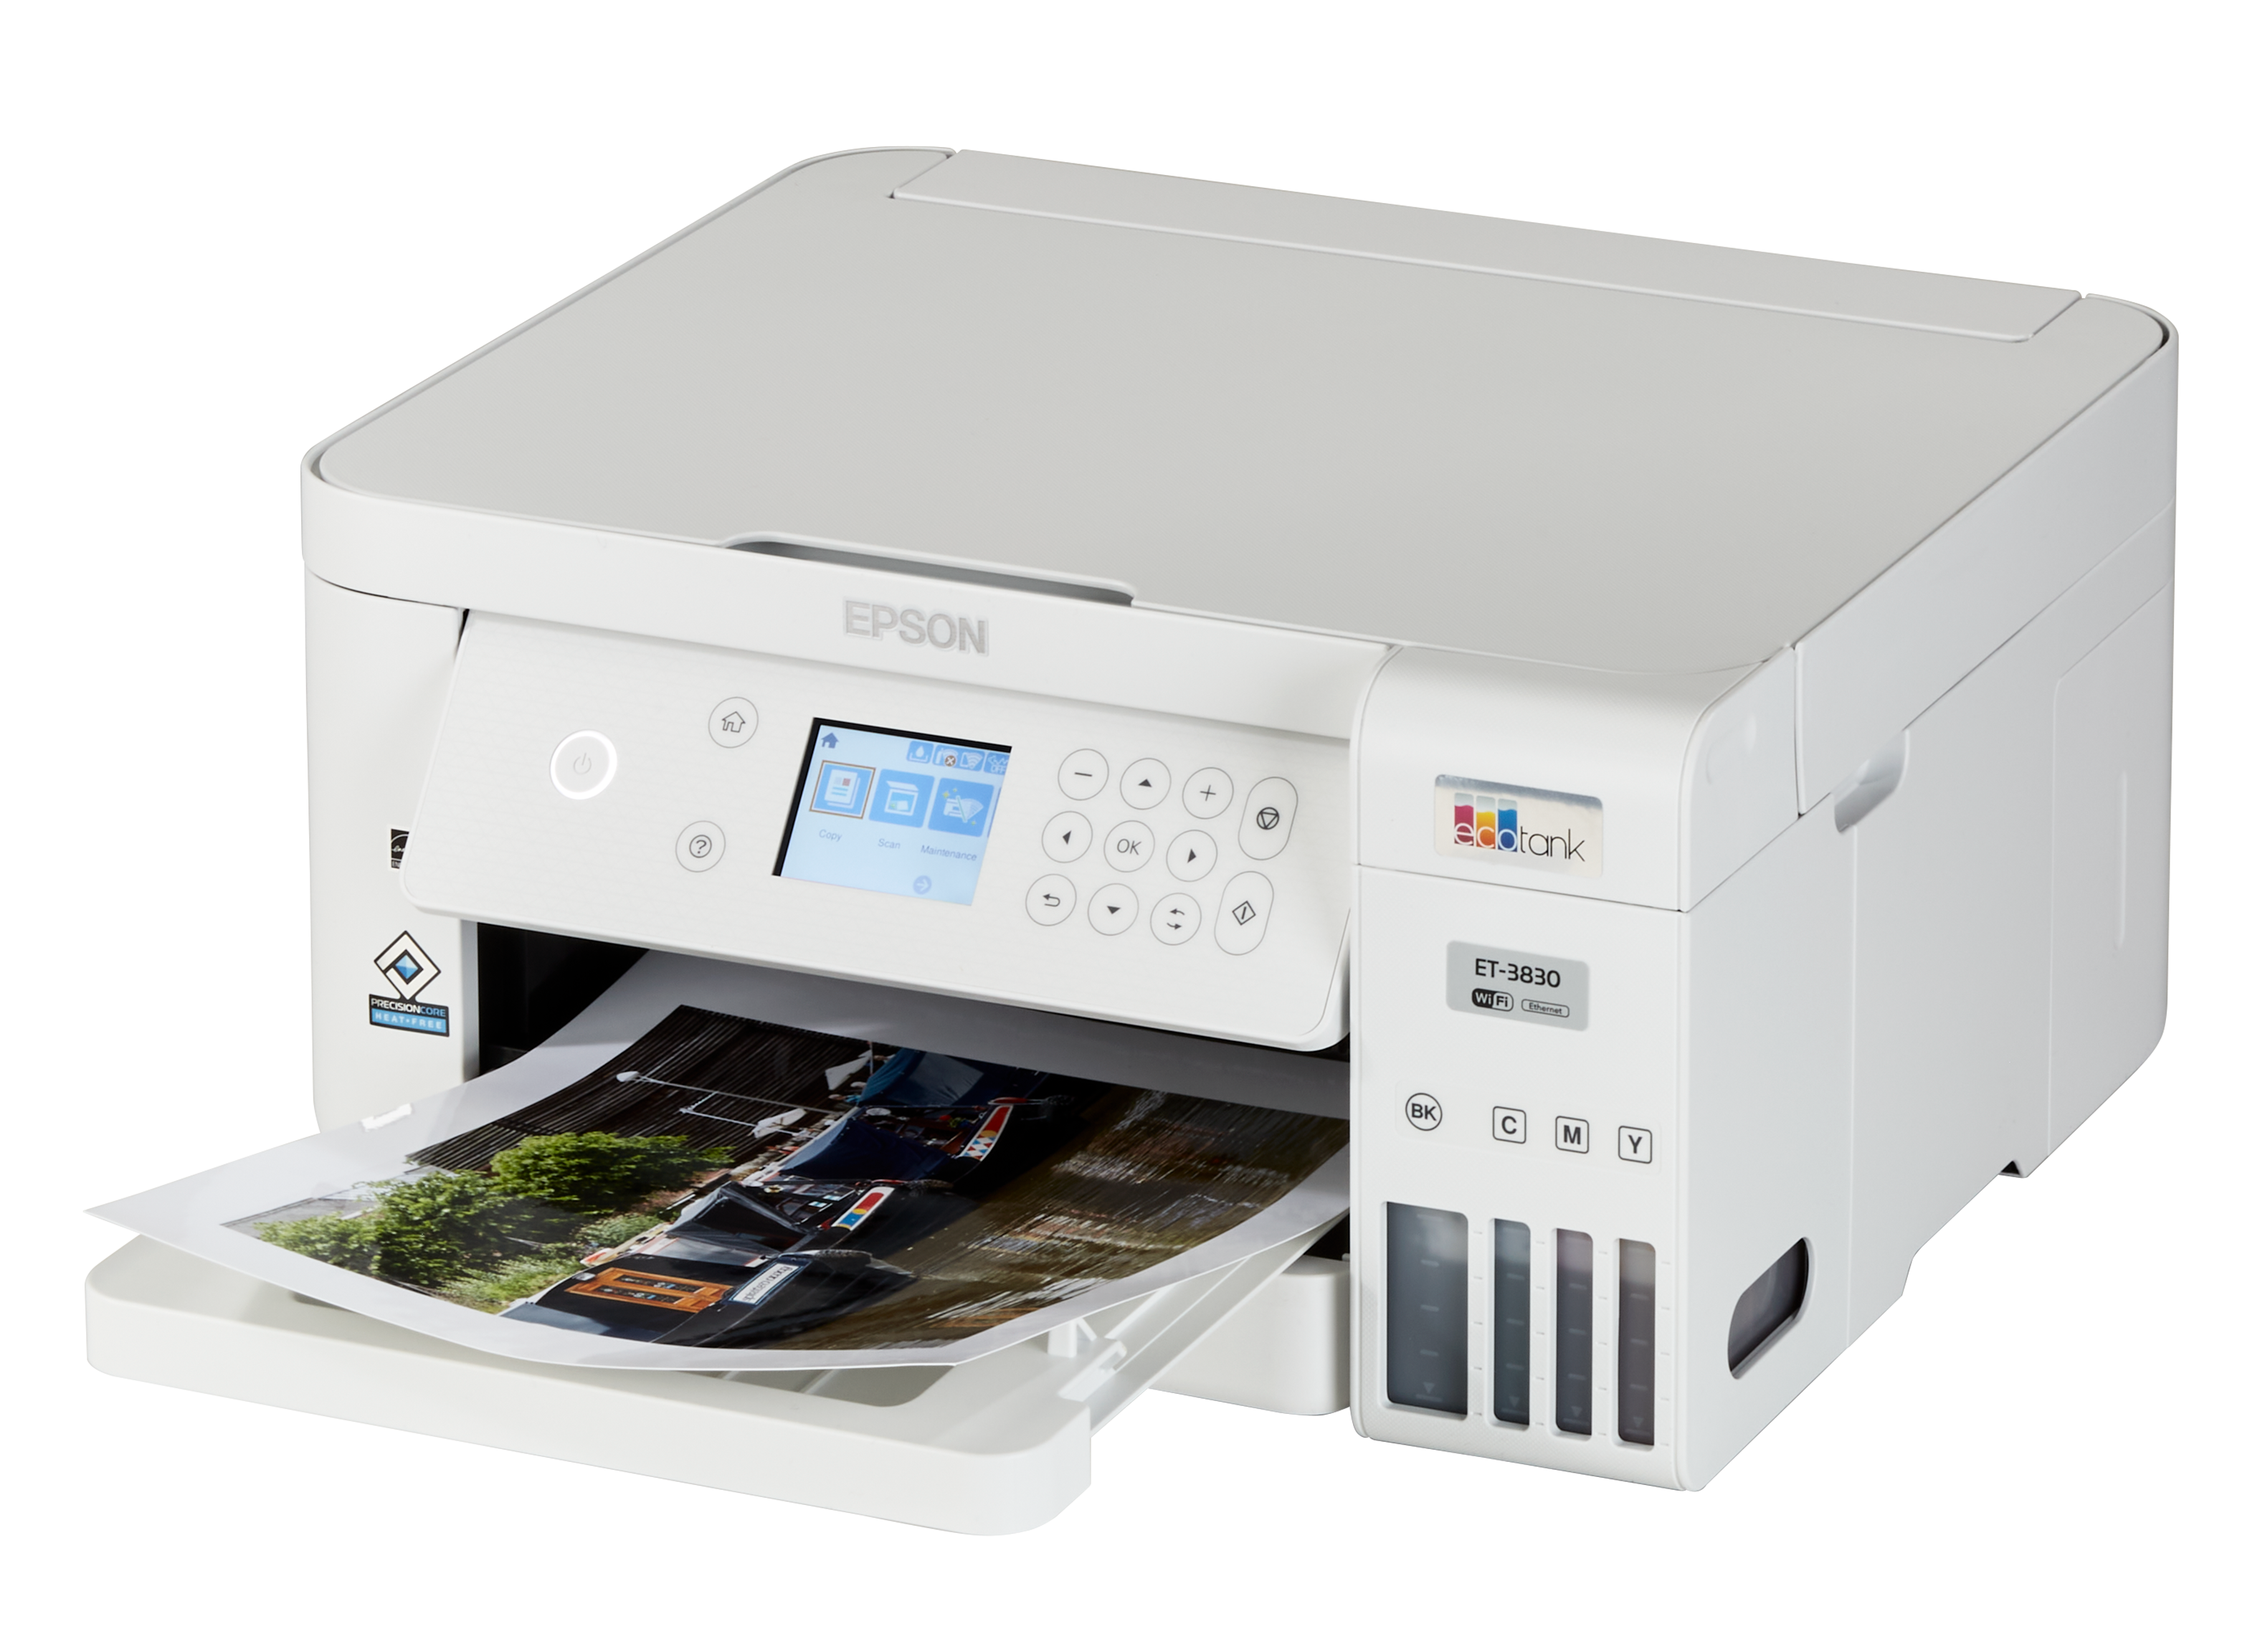 https://crdms.images.consumerreports.org/prod/products/cr/models/404779-all-in-one-inkjet-printers-epson-ecotank-et-3830-10025203.png